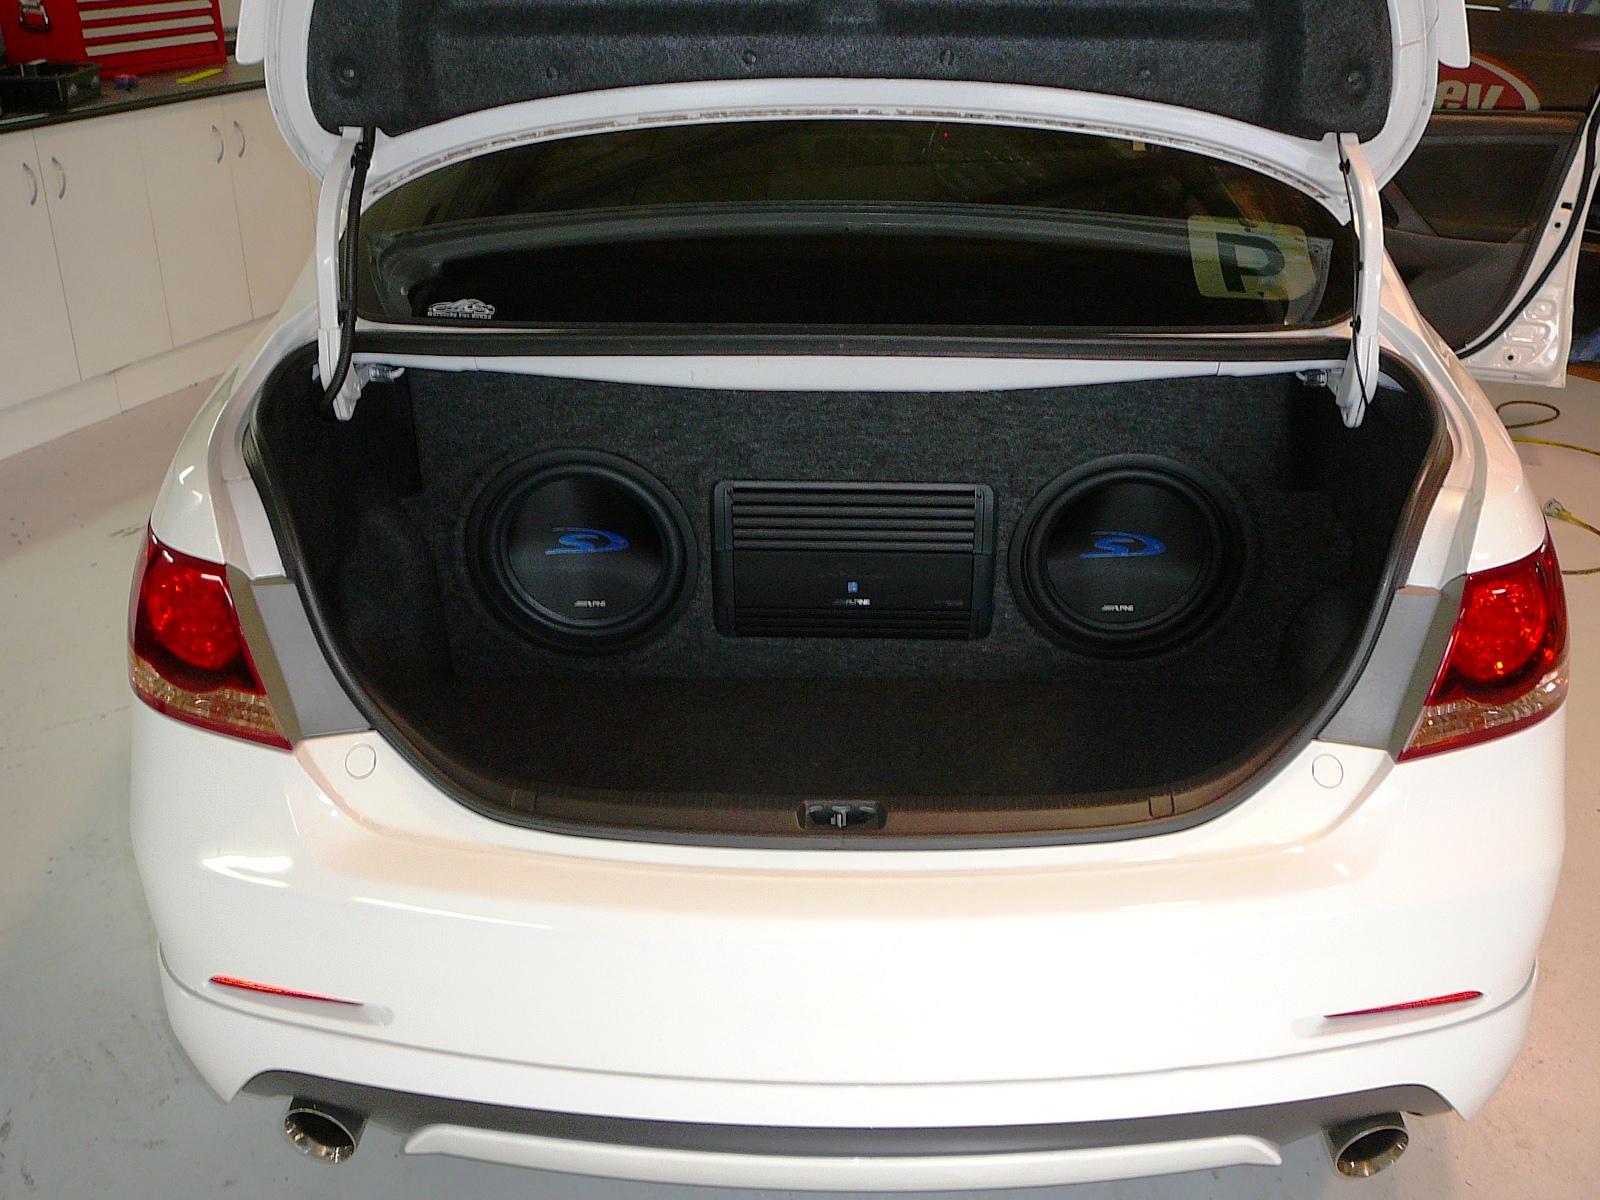 Toyota Aurion Custom Alpine subwoofer and amplifier install